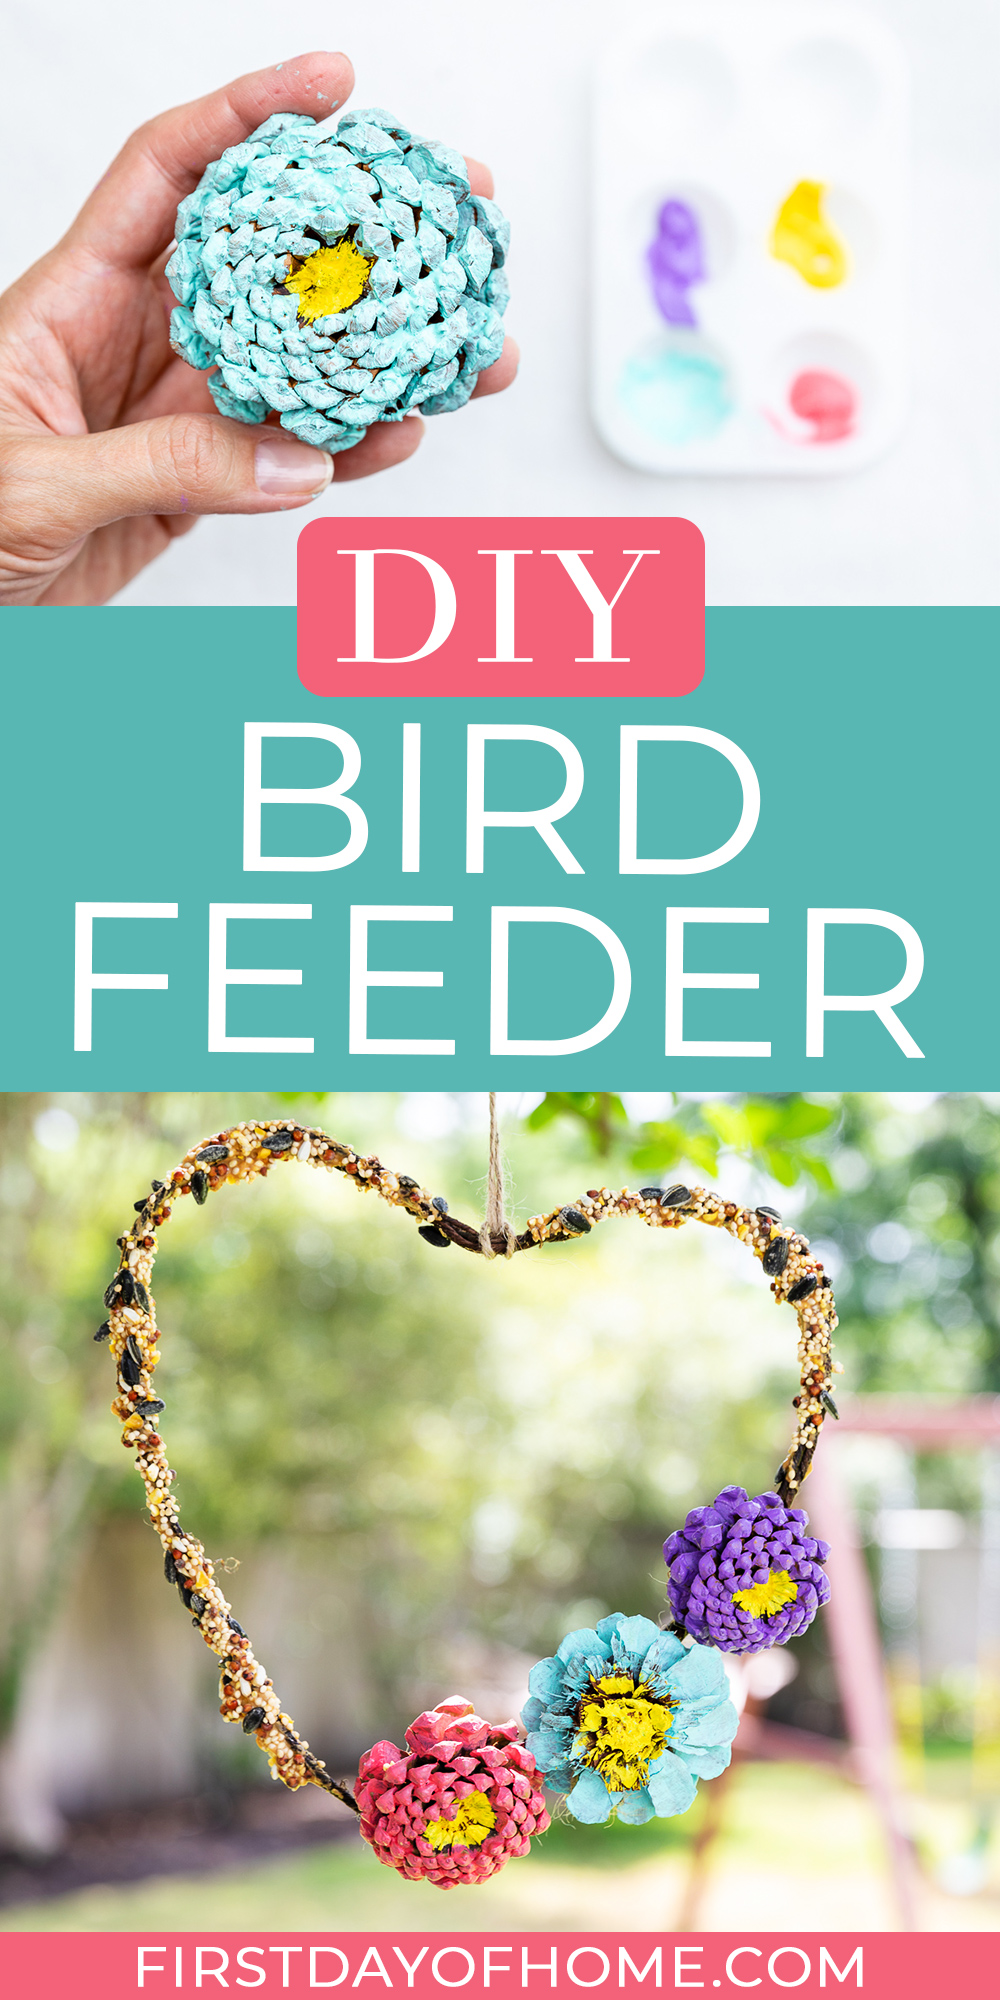 Images of painted pinecones and DIY bird feeder hanging from tree. Text overlay reads "DIY Bird Feeder"